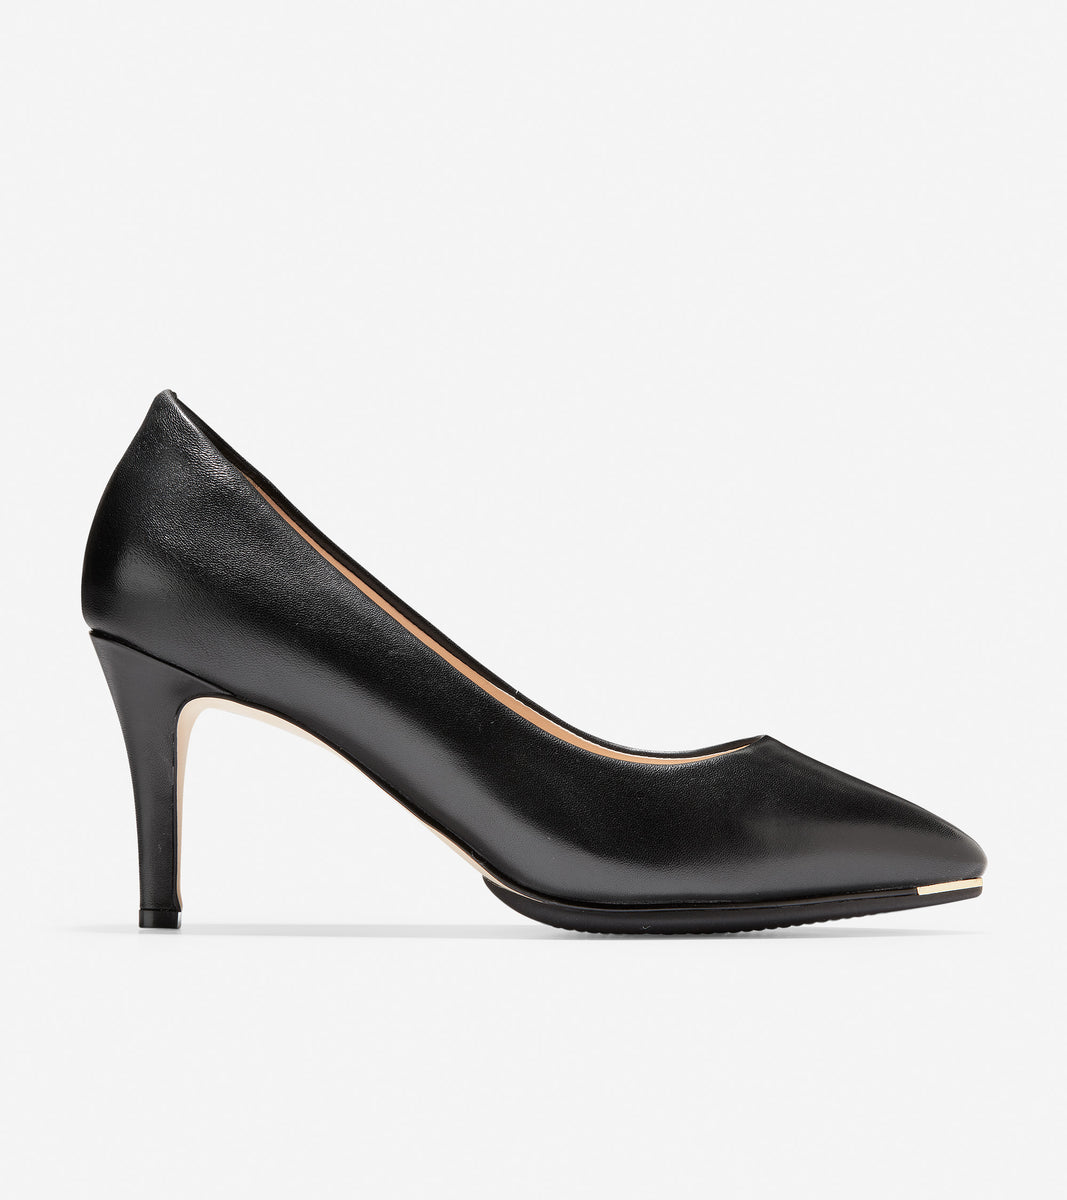 ColeHaan-Grand Ambition Pump-w15828-Black Leather